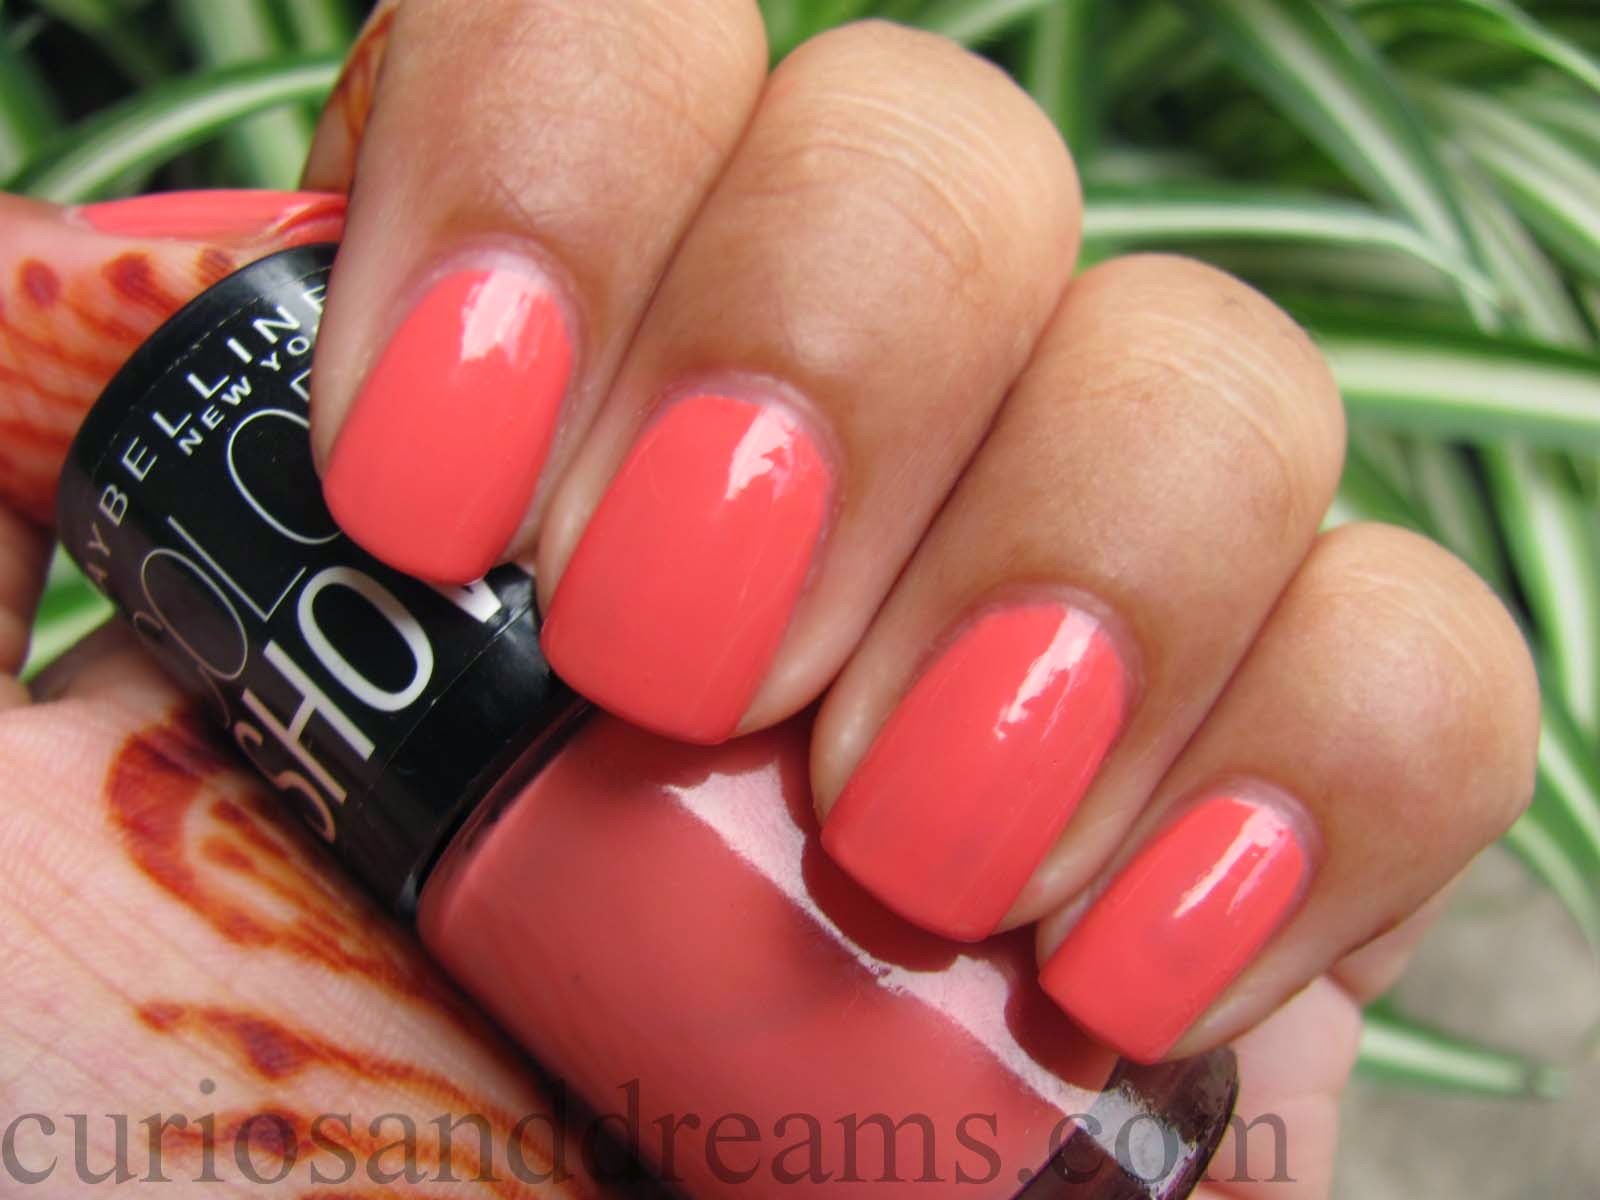 Maybelline Color Show Nail Polish in Coral Craze - wide 2